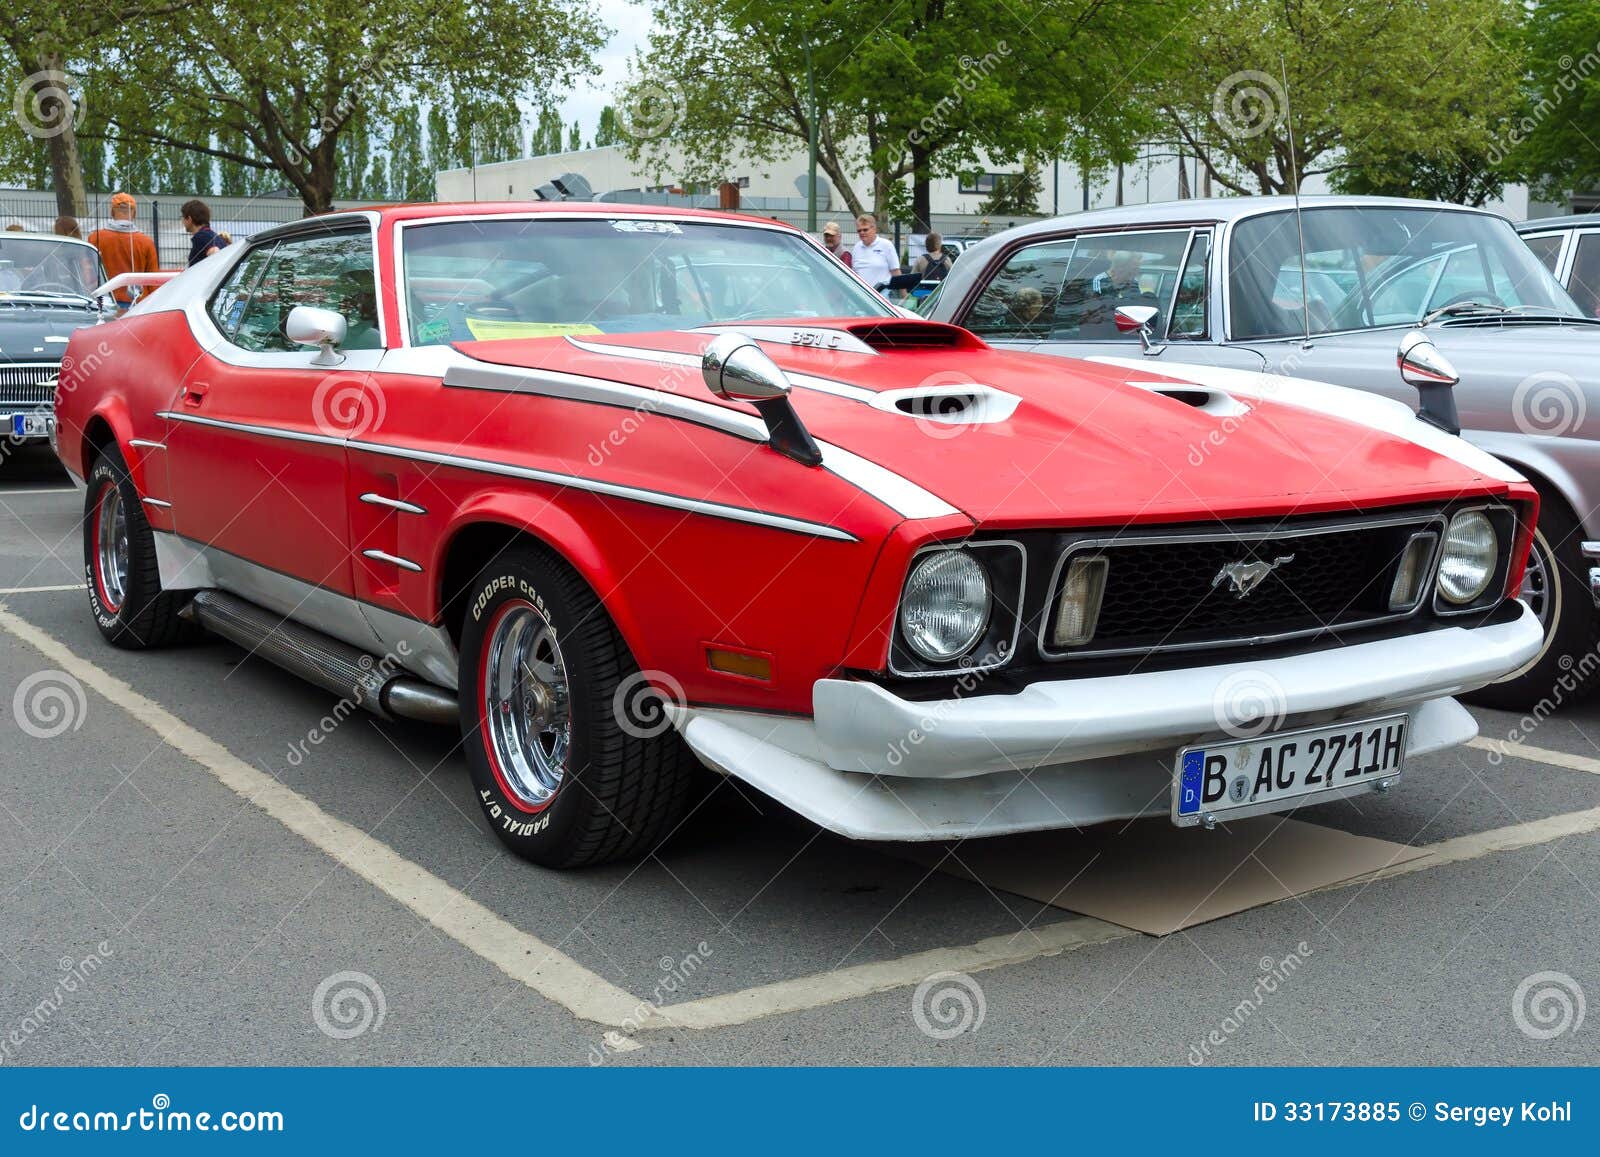 Sport Car Ford Mustang Mach I Editorial Image - Image of spring ...